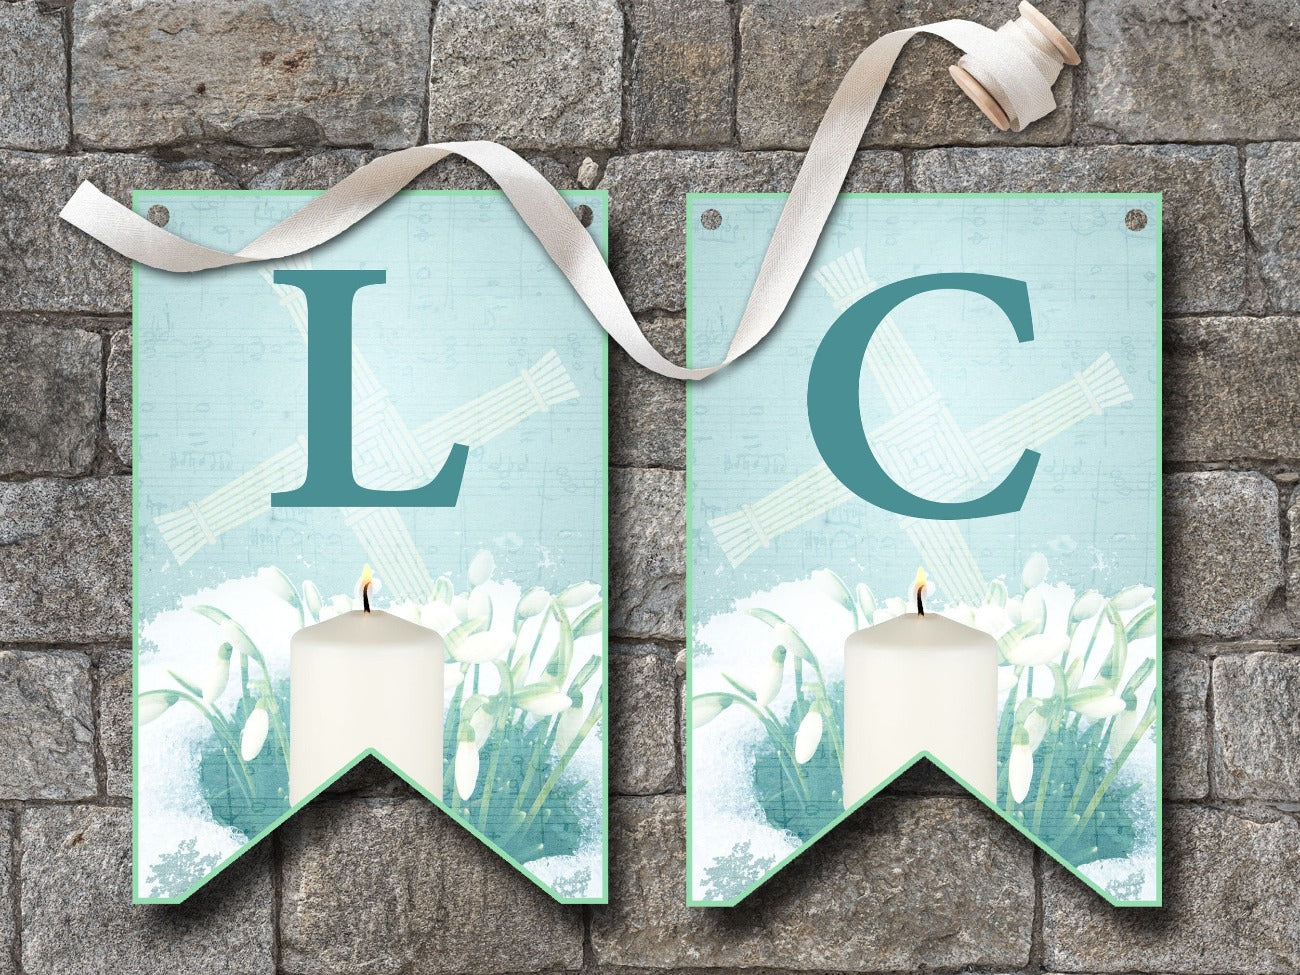 IMBOLC BANNER Bunting, Flags L and C, flags are pale blue with dark blue letters, each flag is imbellished with a Brigids Cross, snowdrops peeking through a layer of snow and a lit white candle - Morgana Magick Spell